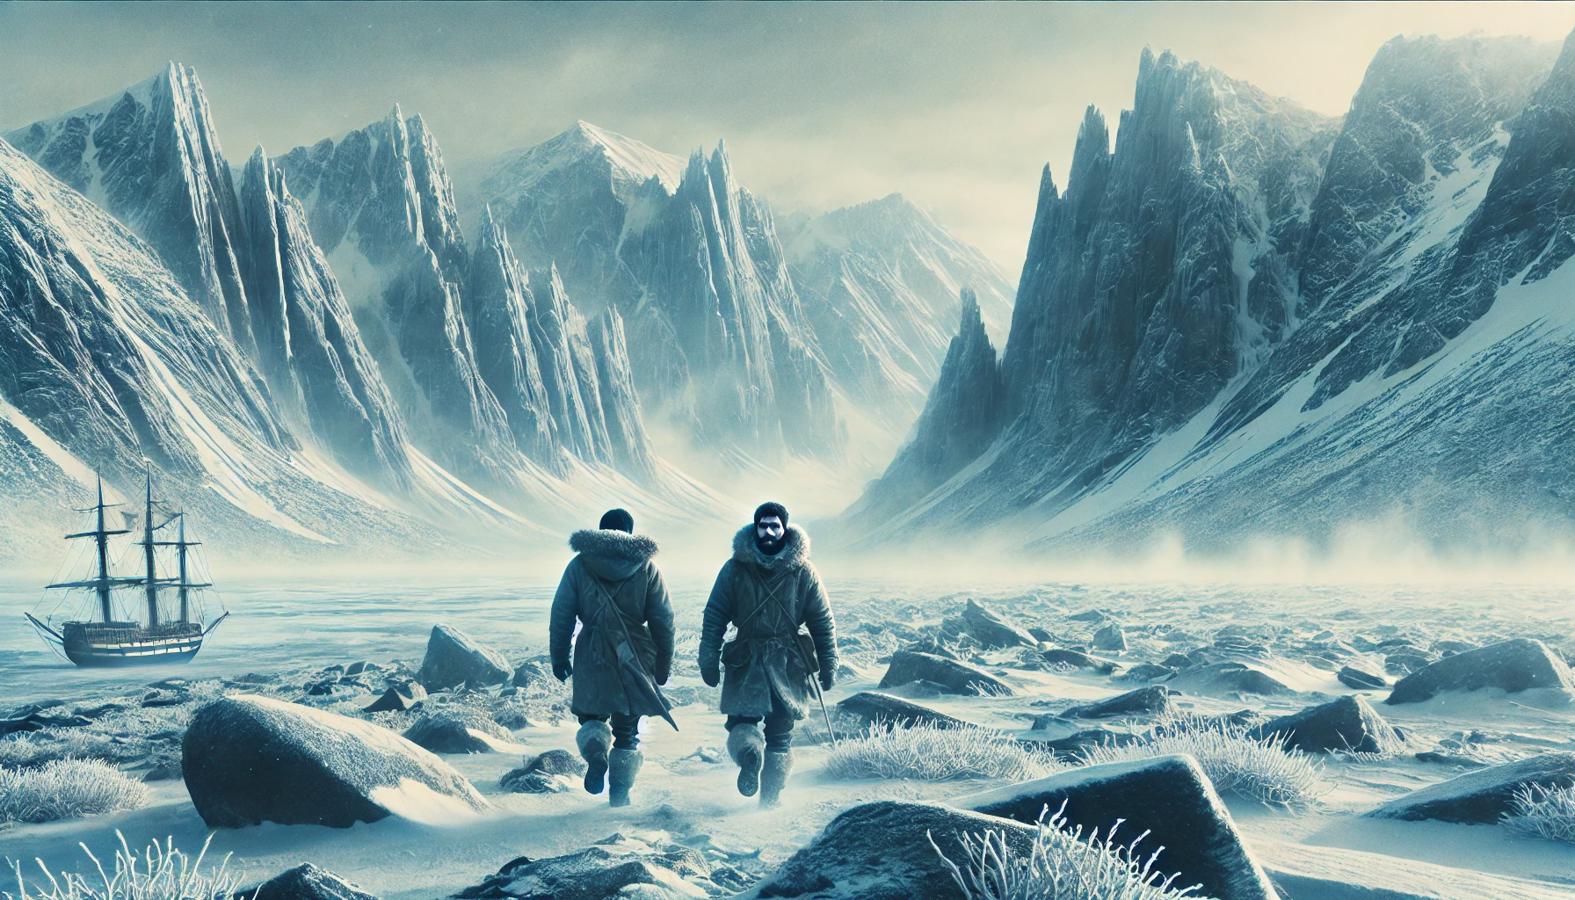 Edgar and Alaric trekking through a frozen tundra on their quest for rare ingredients, bundled in warm clothing.